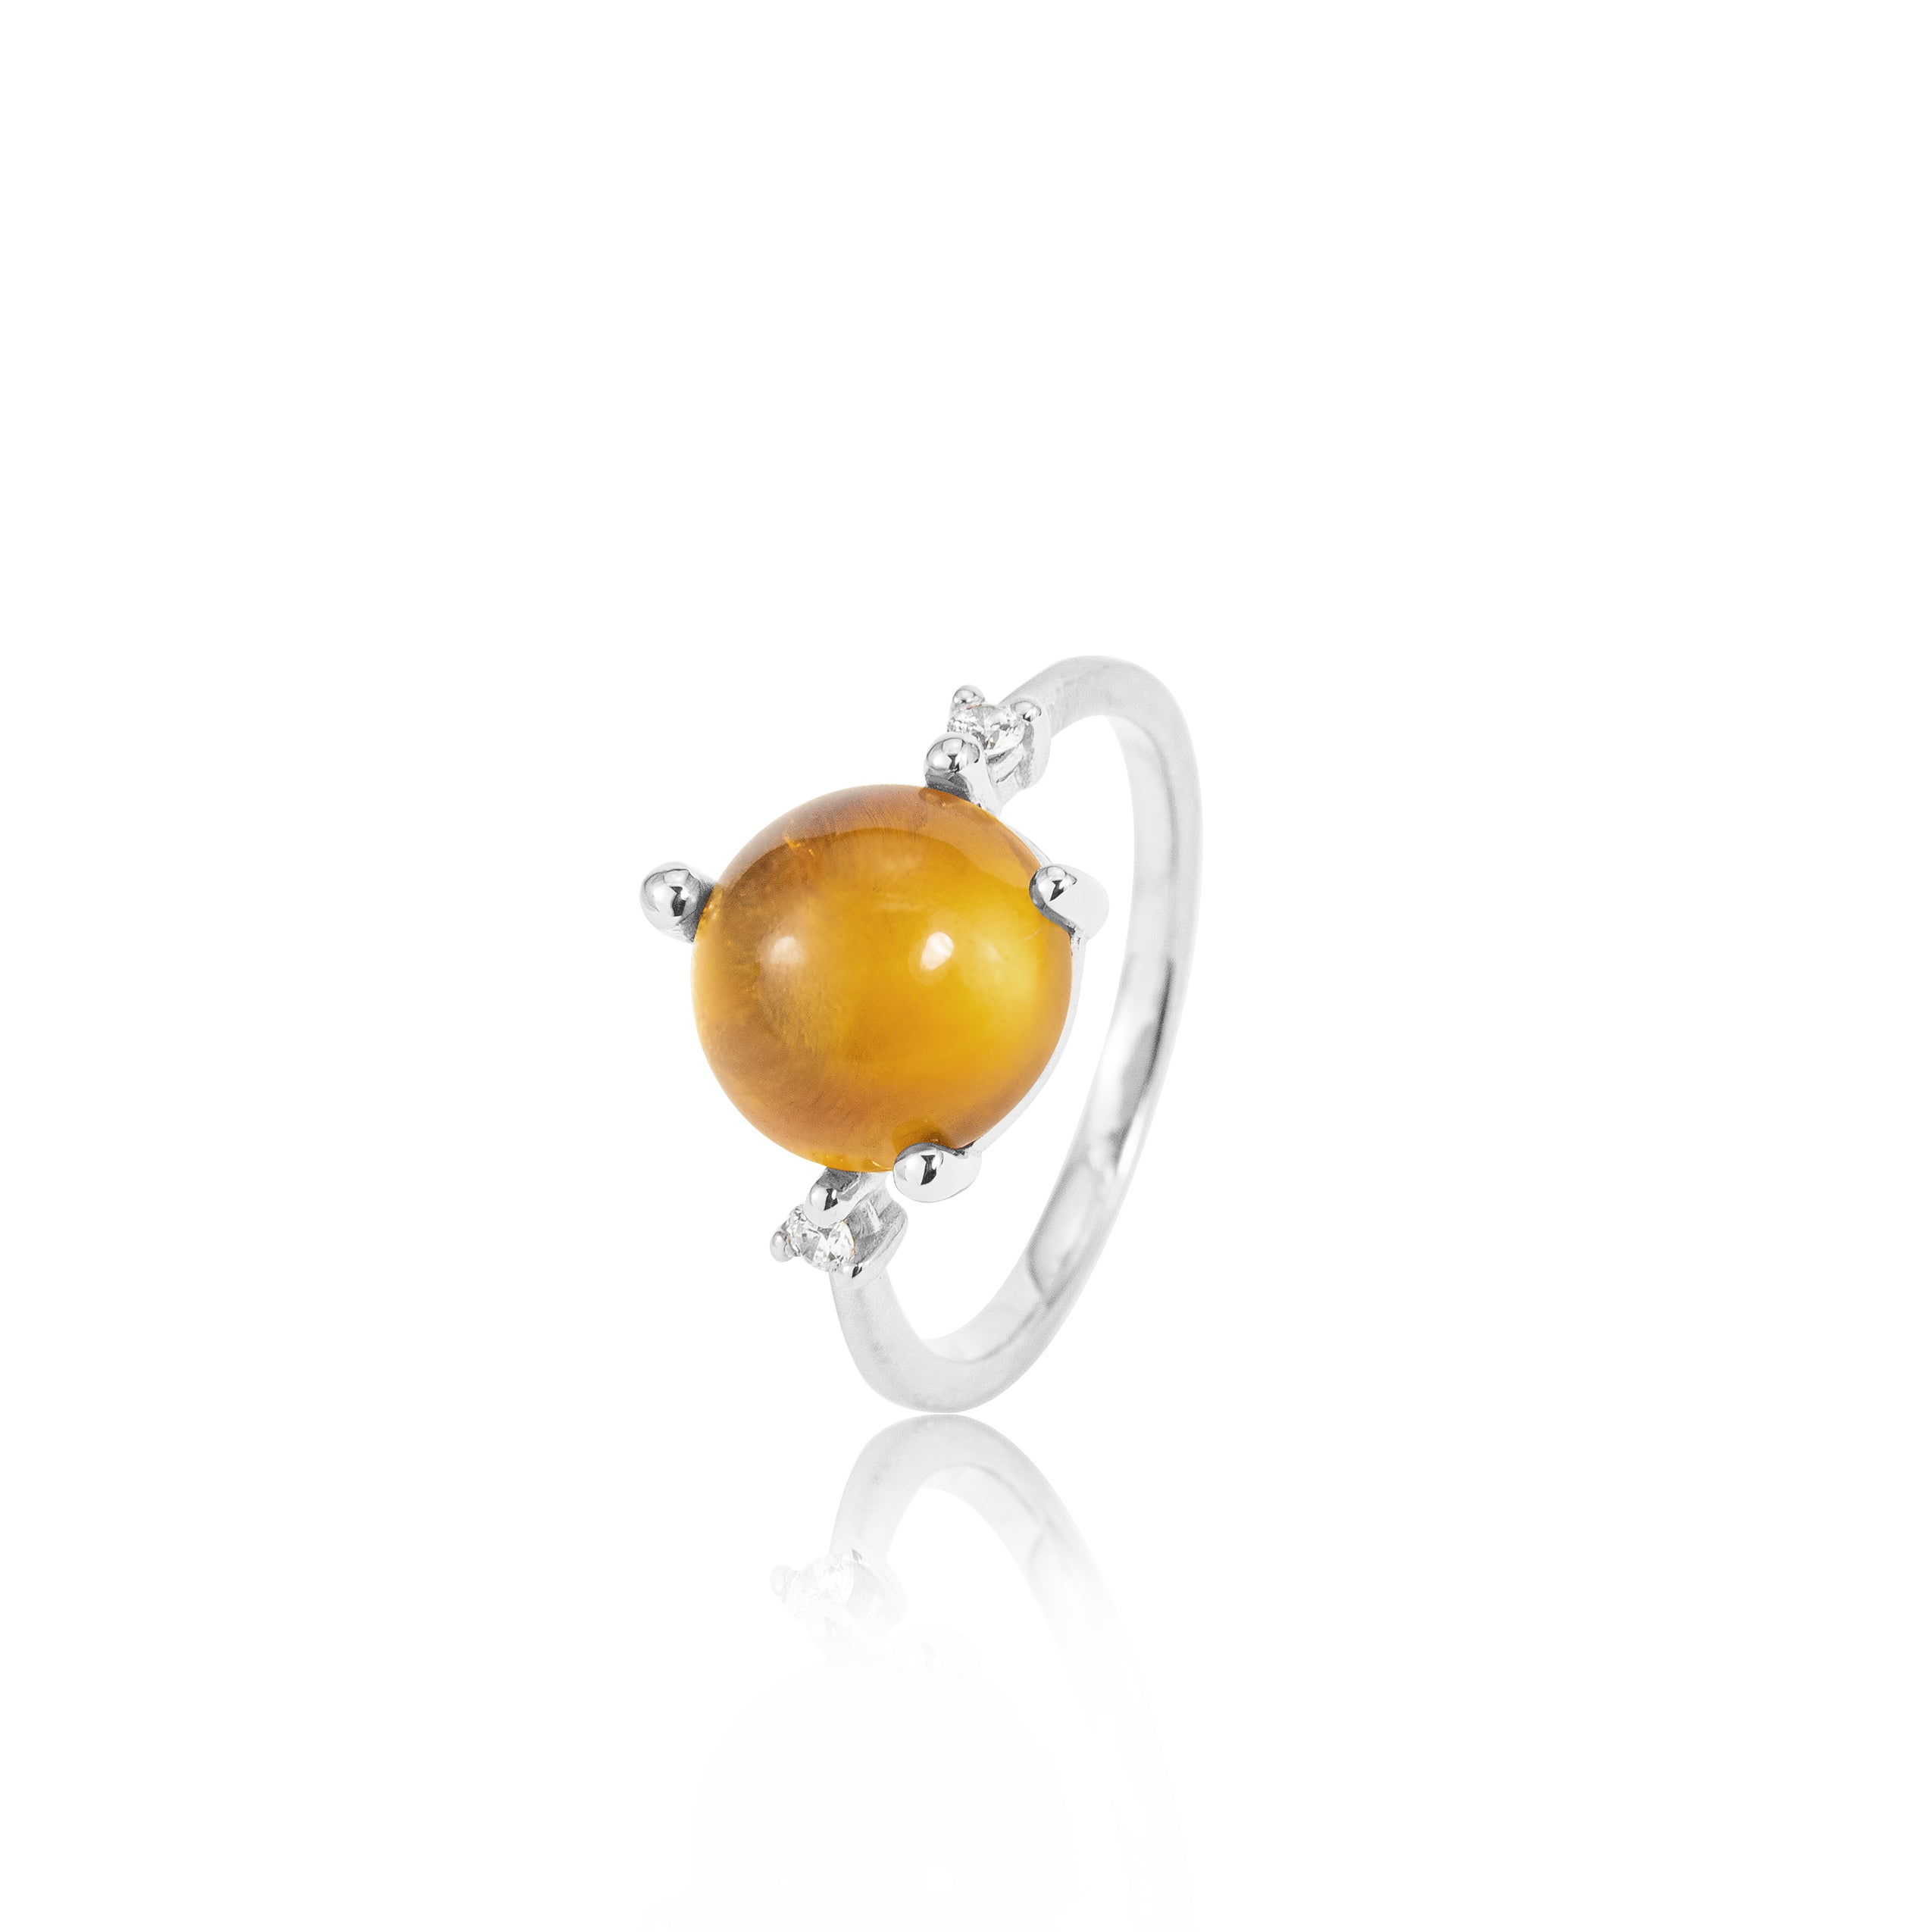 Stellini ring "big" in 585/- gold with citrine